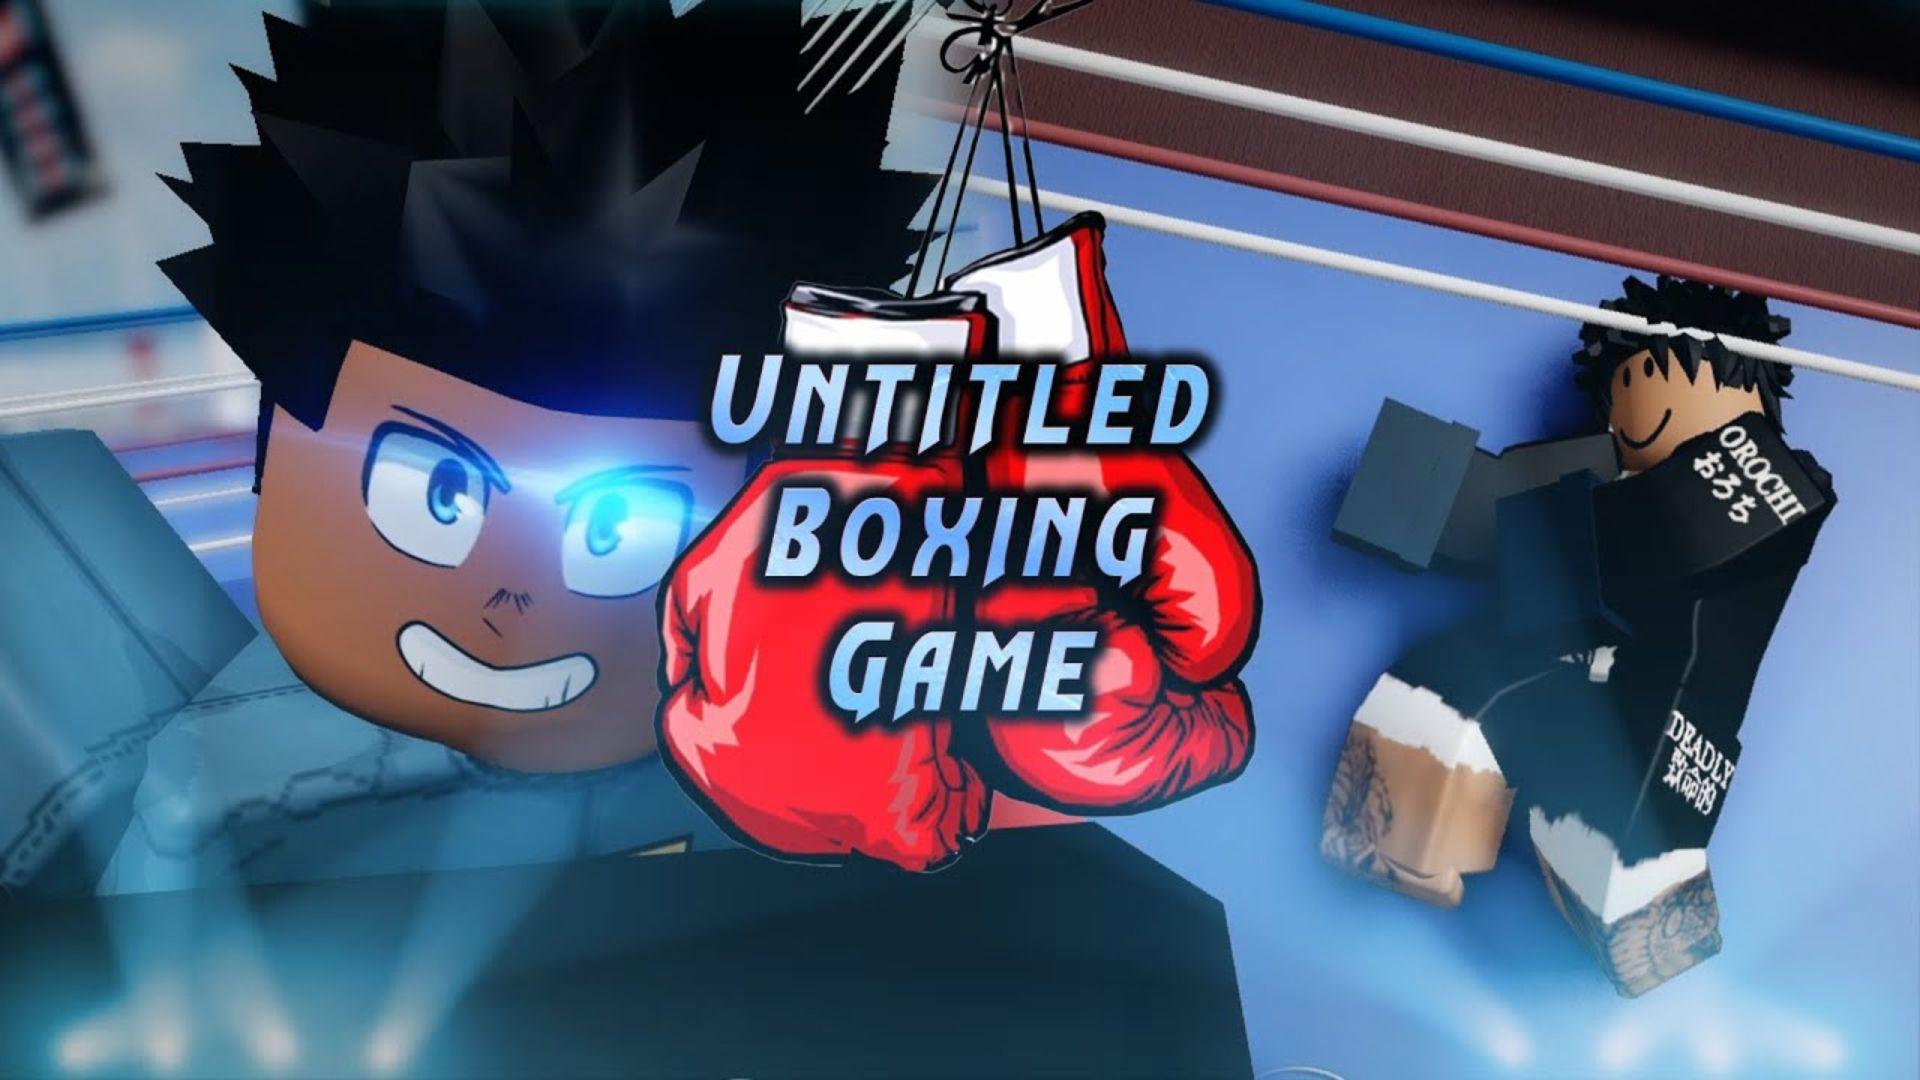 Untitled code roblox. Untitled Boxing game Tier list. Untitled Boxing game codes. Акума РОБЛОКС. Untitled Boxing game Styles.